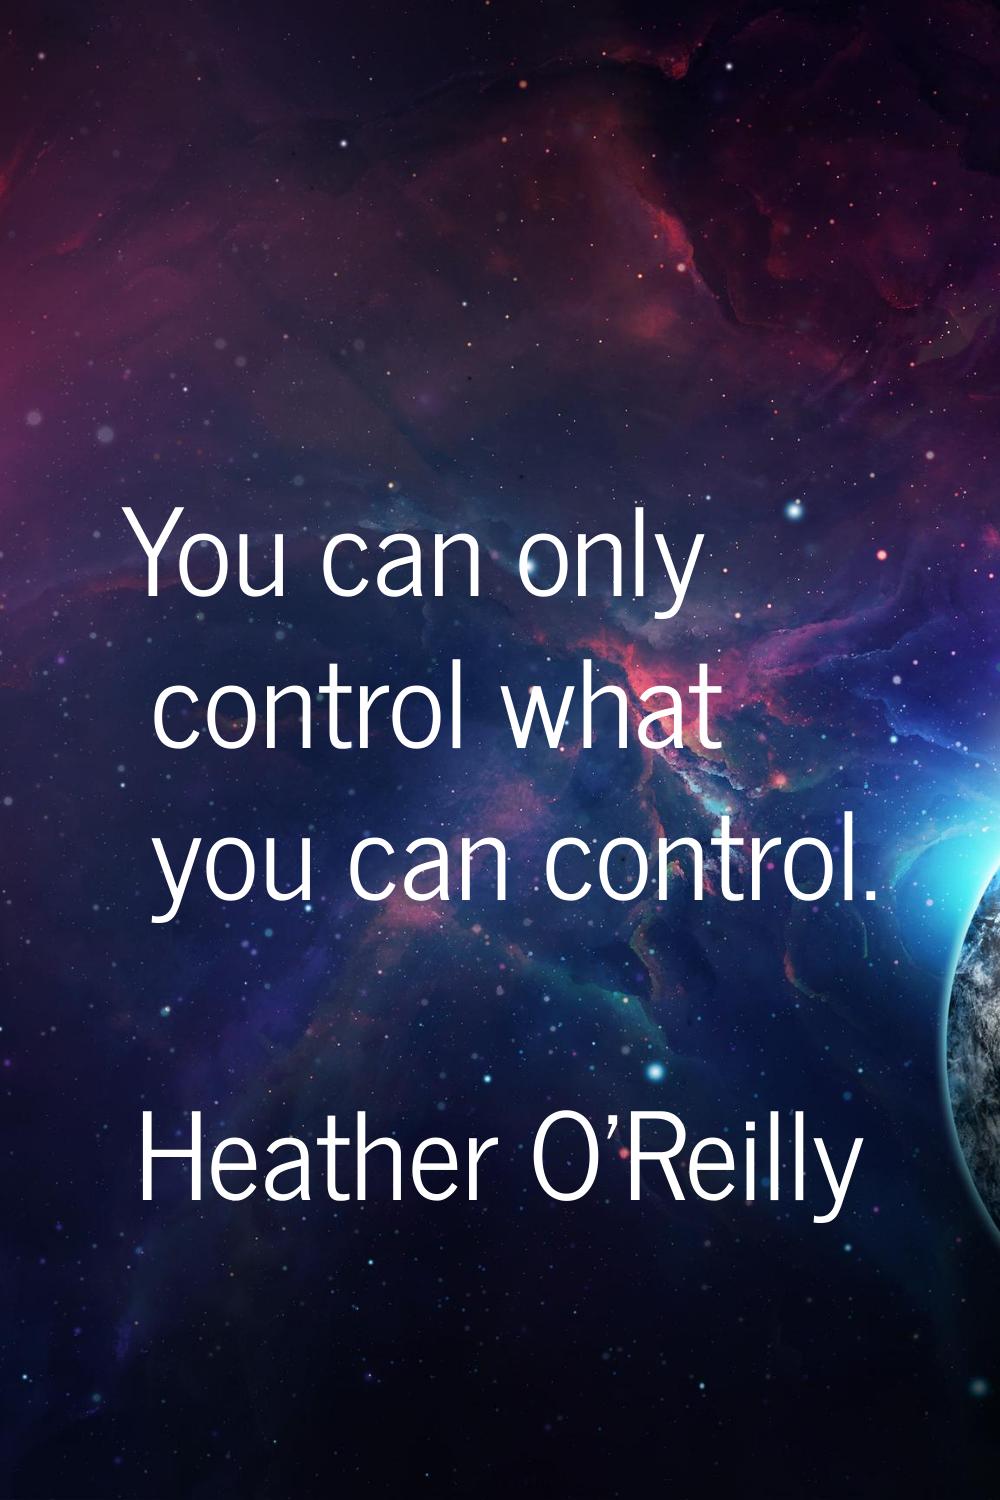 You can only control what you can control.